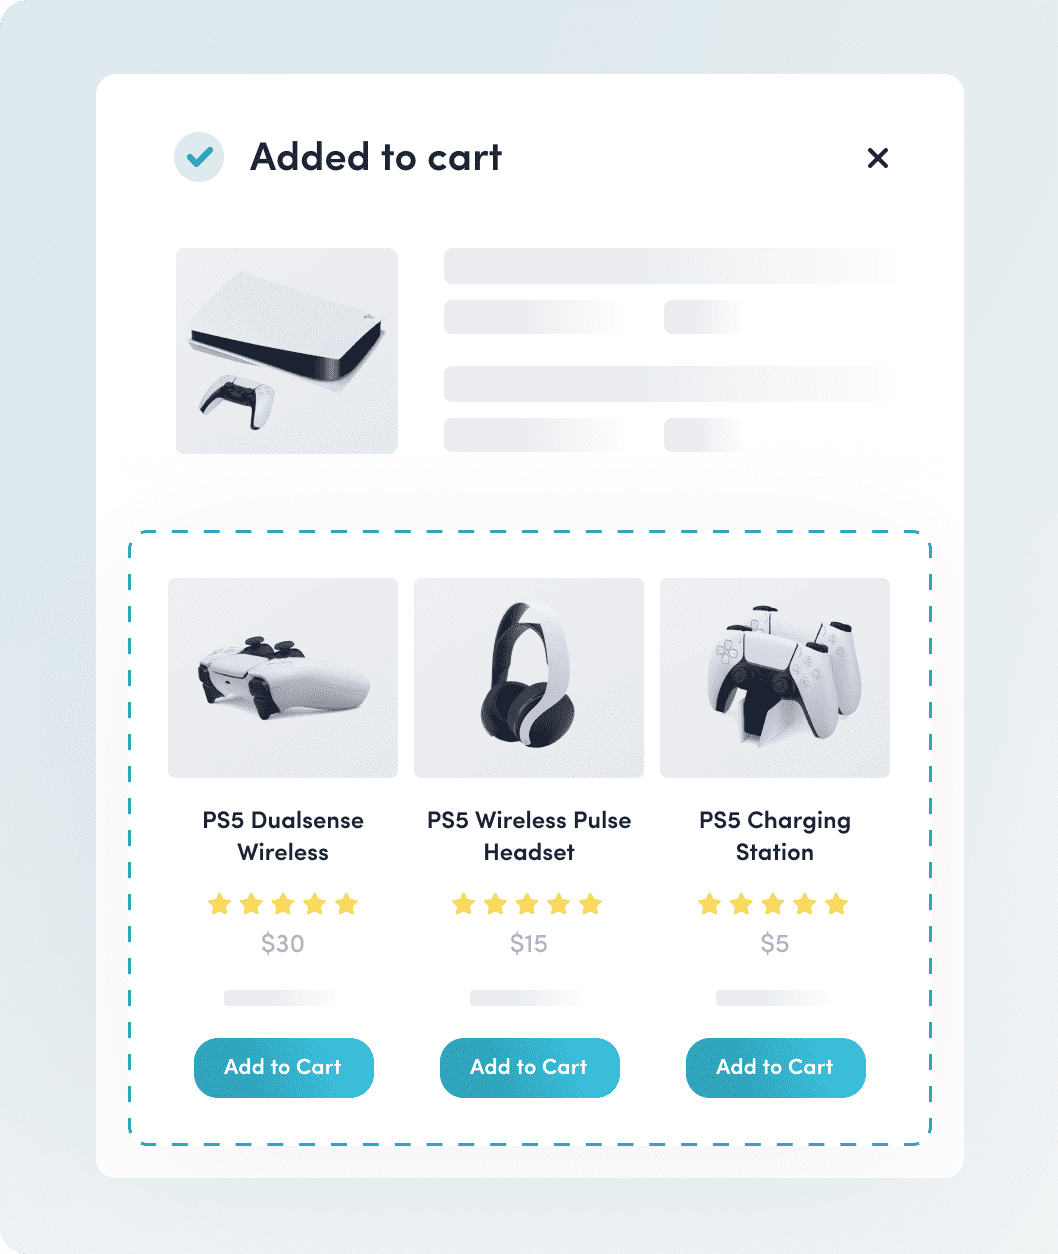 Recommender popup after adding item to cart